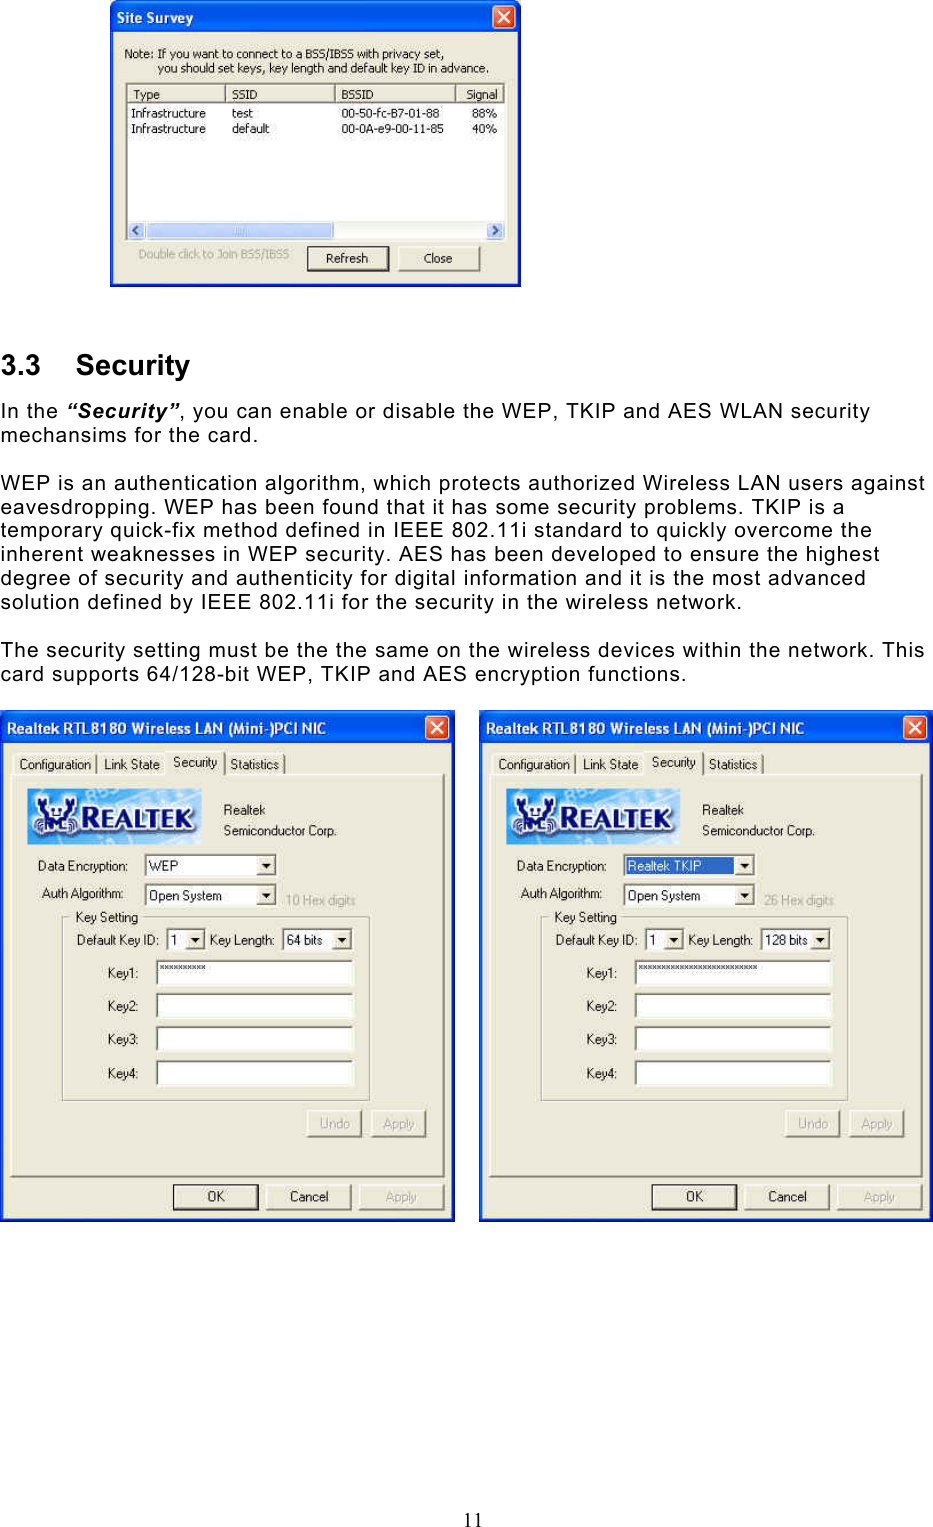  11   3.3 Security In the “Security”, you can enable or disable the WEP, TKIP and AES WLAN security mechansims for the card.  WEP is an authentication algorithm, which protects authorized Wireless LAN users against eavesdropping. WEP has been found that it has some security problems. TKIP is a temporary quick-fix method defined in IEEE 802.11i standard to quickly overcome the inherent weaknesses in WEP security. AES has been developed to ensure the highest degree of security and authenticity for digital information and it is the most advanced solution defined by IEEE 802.11i for the security in the wireless network.  The security setting must be the the same on the wireless devices within the network. This card supports 64/128-bit WEP, TKIP and AES encryption functions.                 